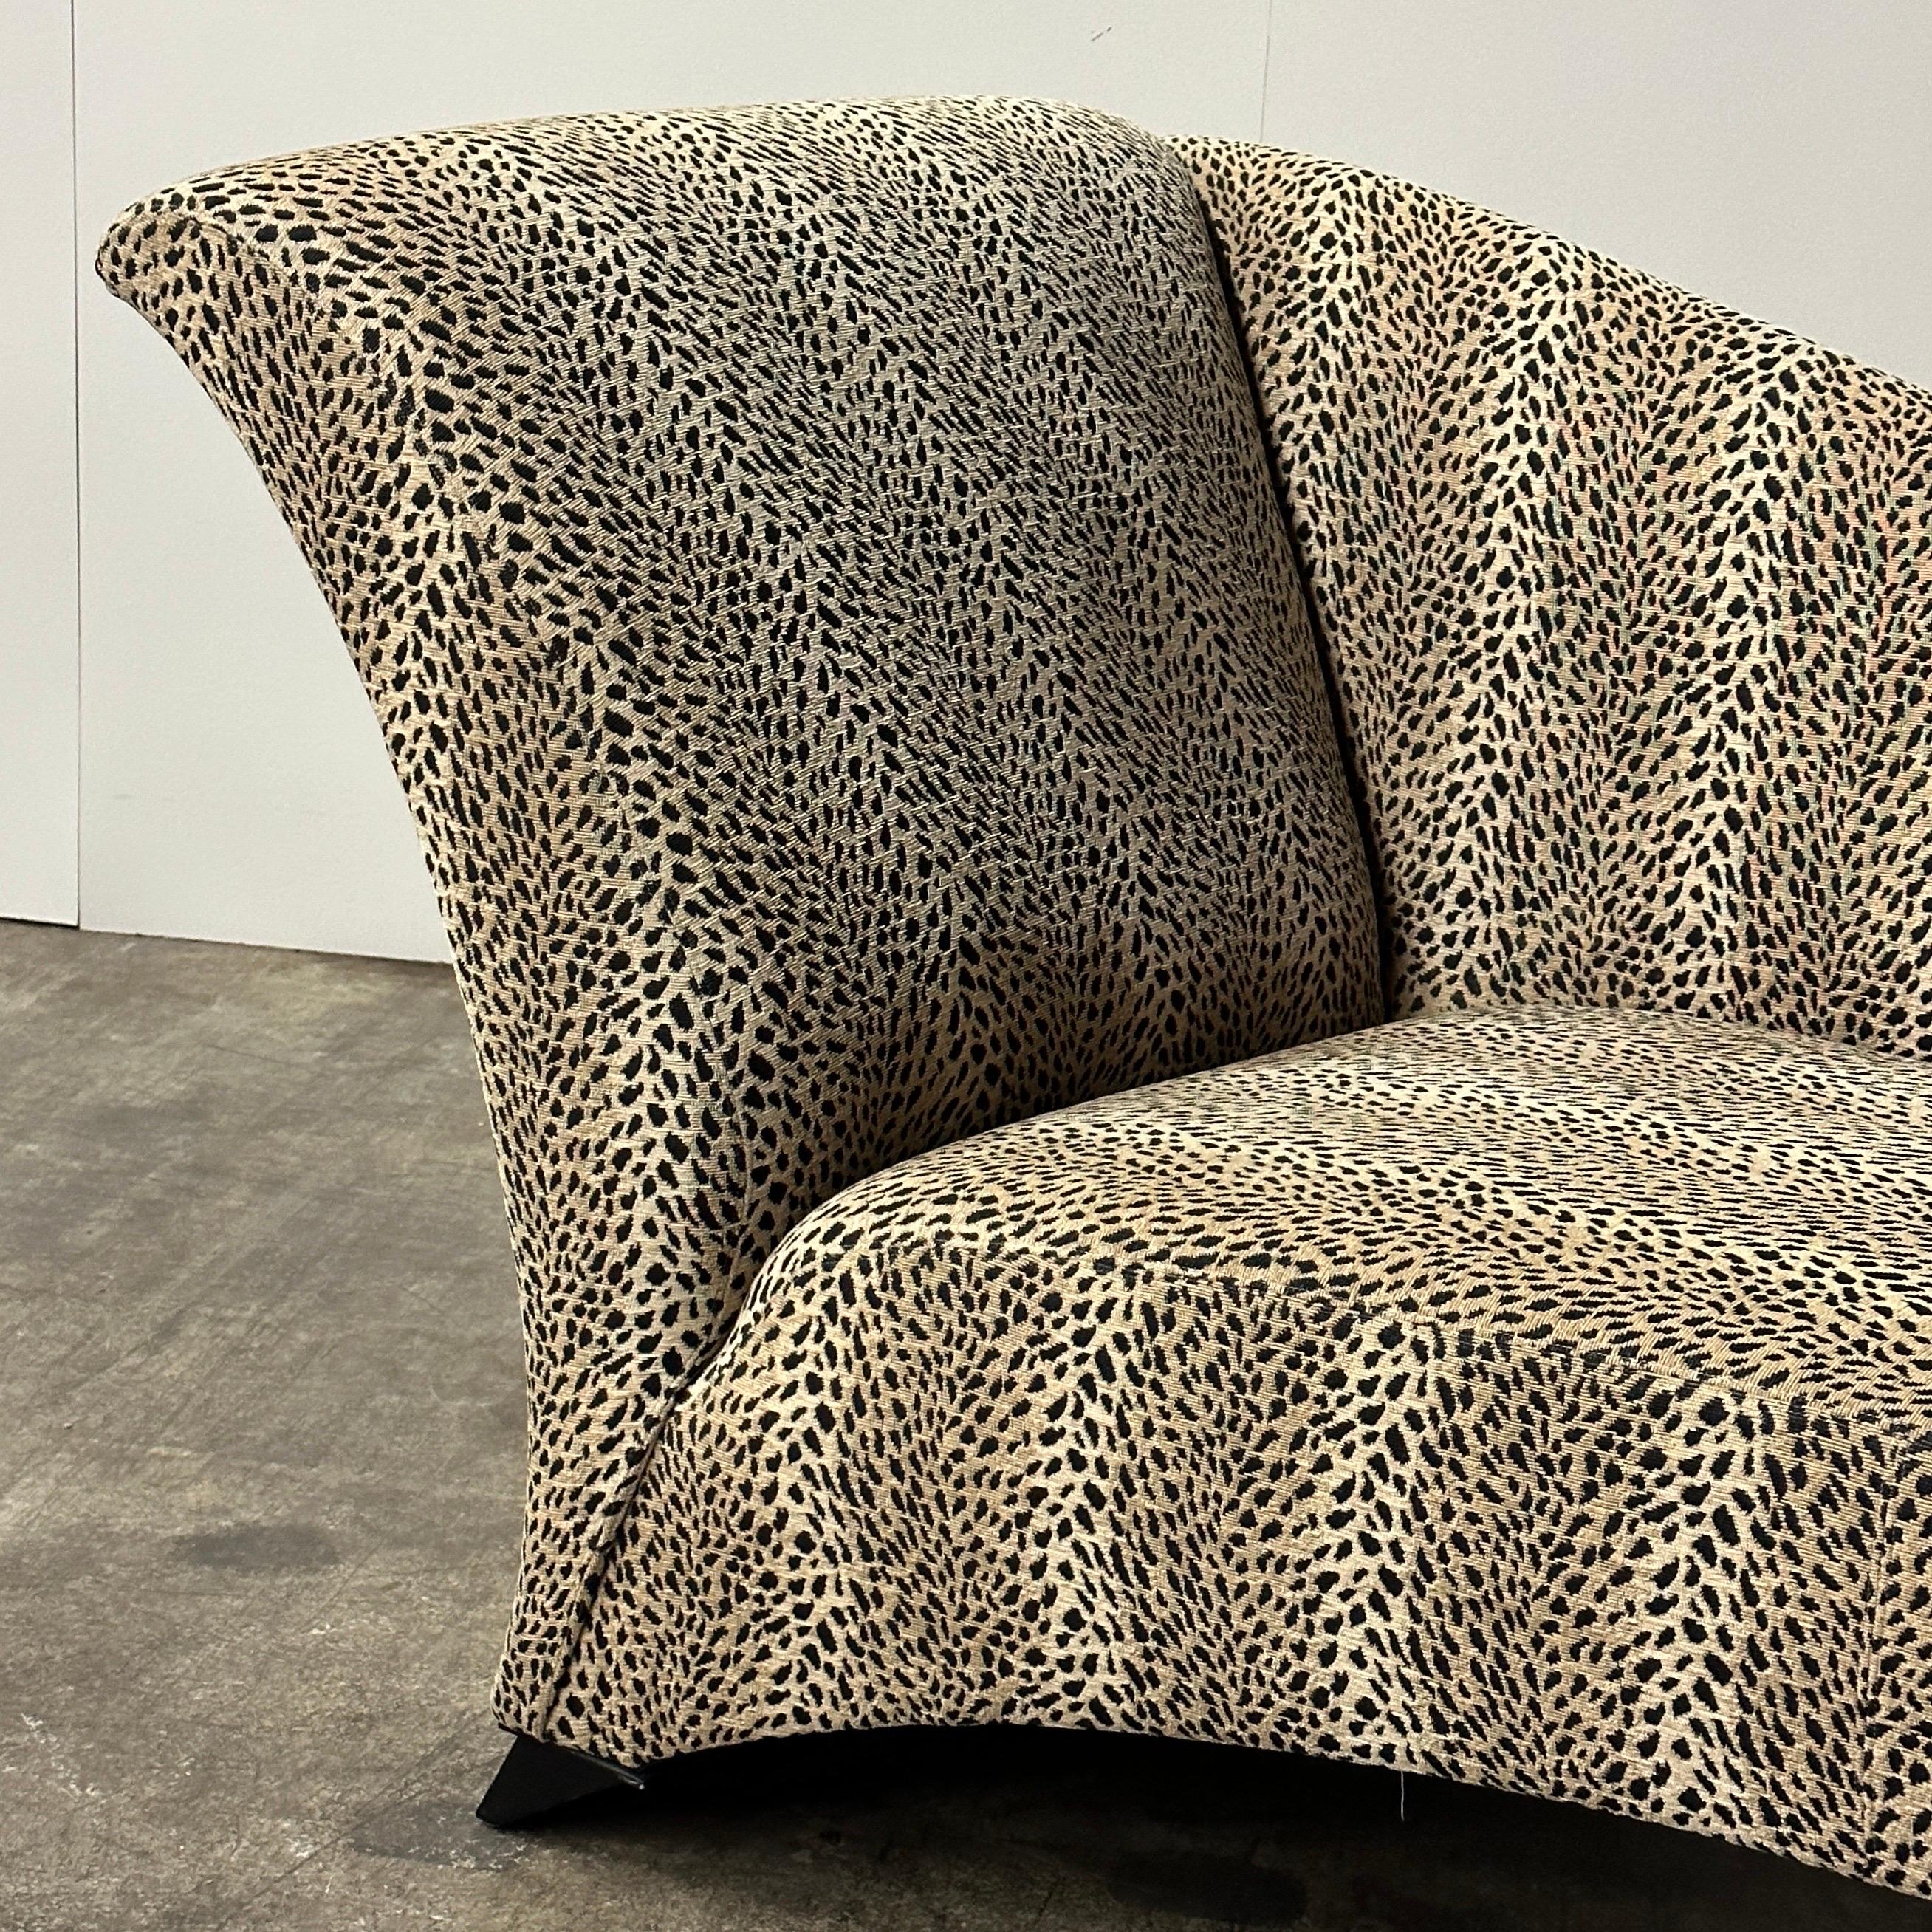 c. 1980s. Upholstered in its original leopard print fabric. Tagged. Has unique feet which are not on any other models online.